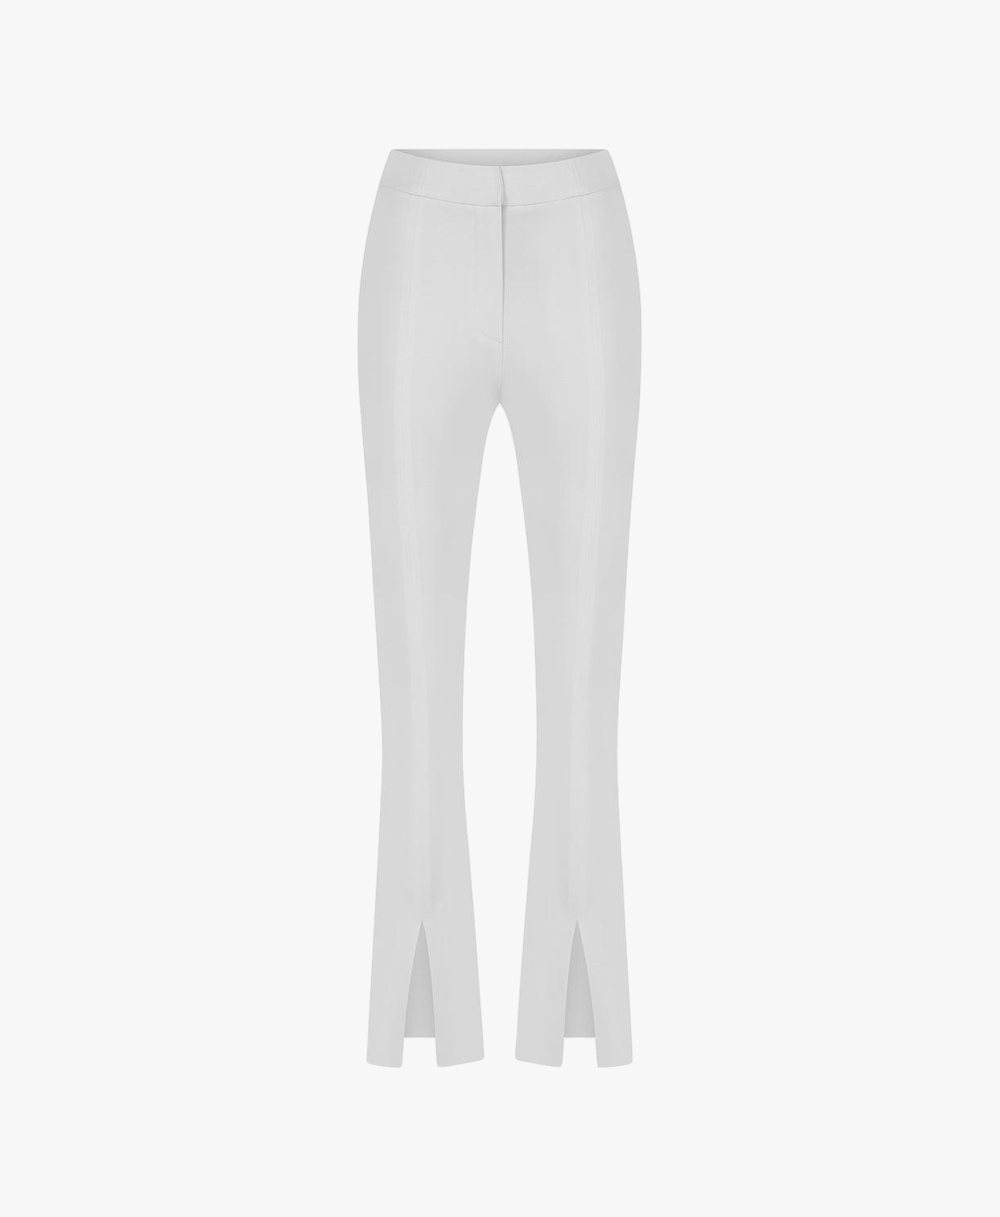 CANIS-TROUSERS WITH FRONT SLIT IN WHITE image #0